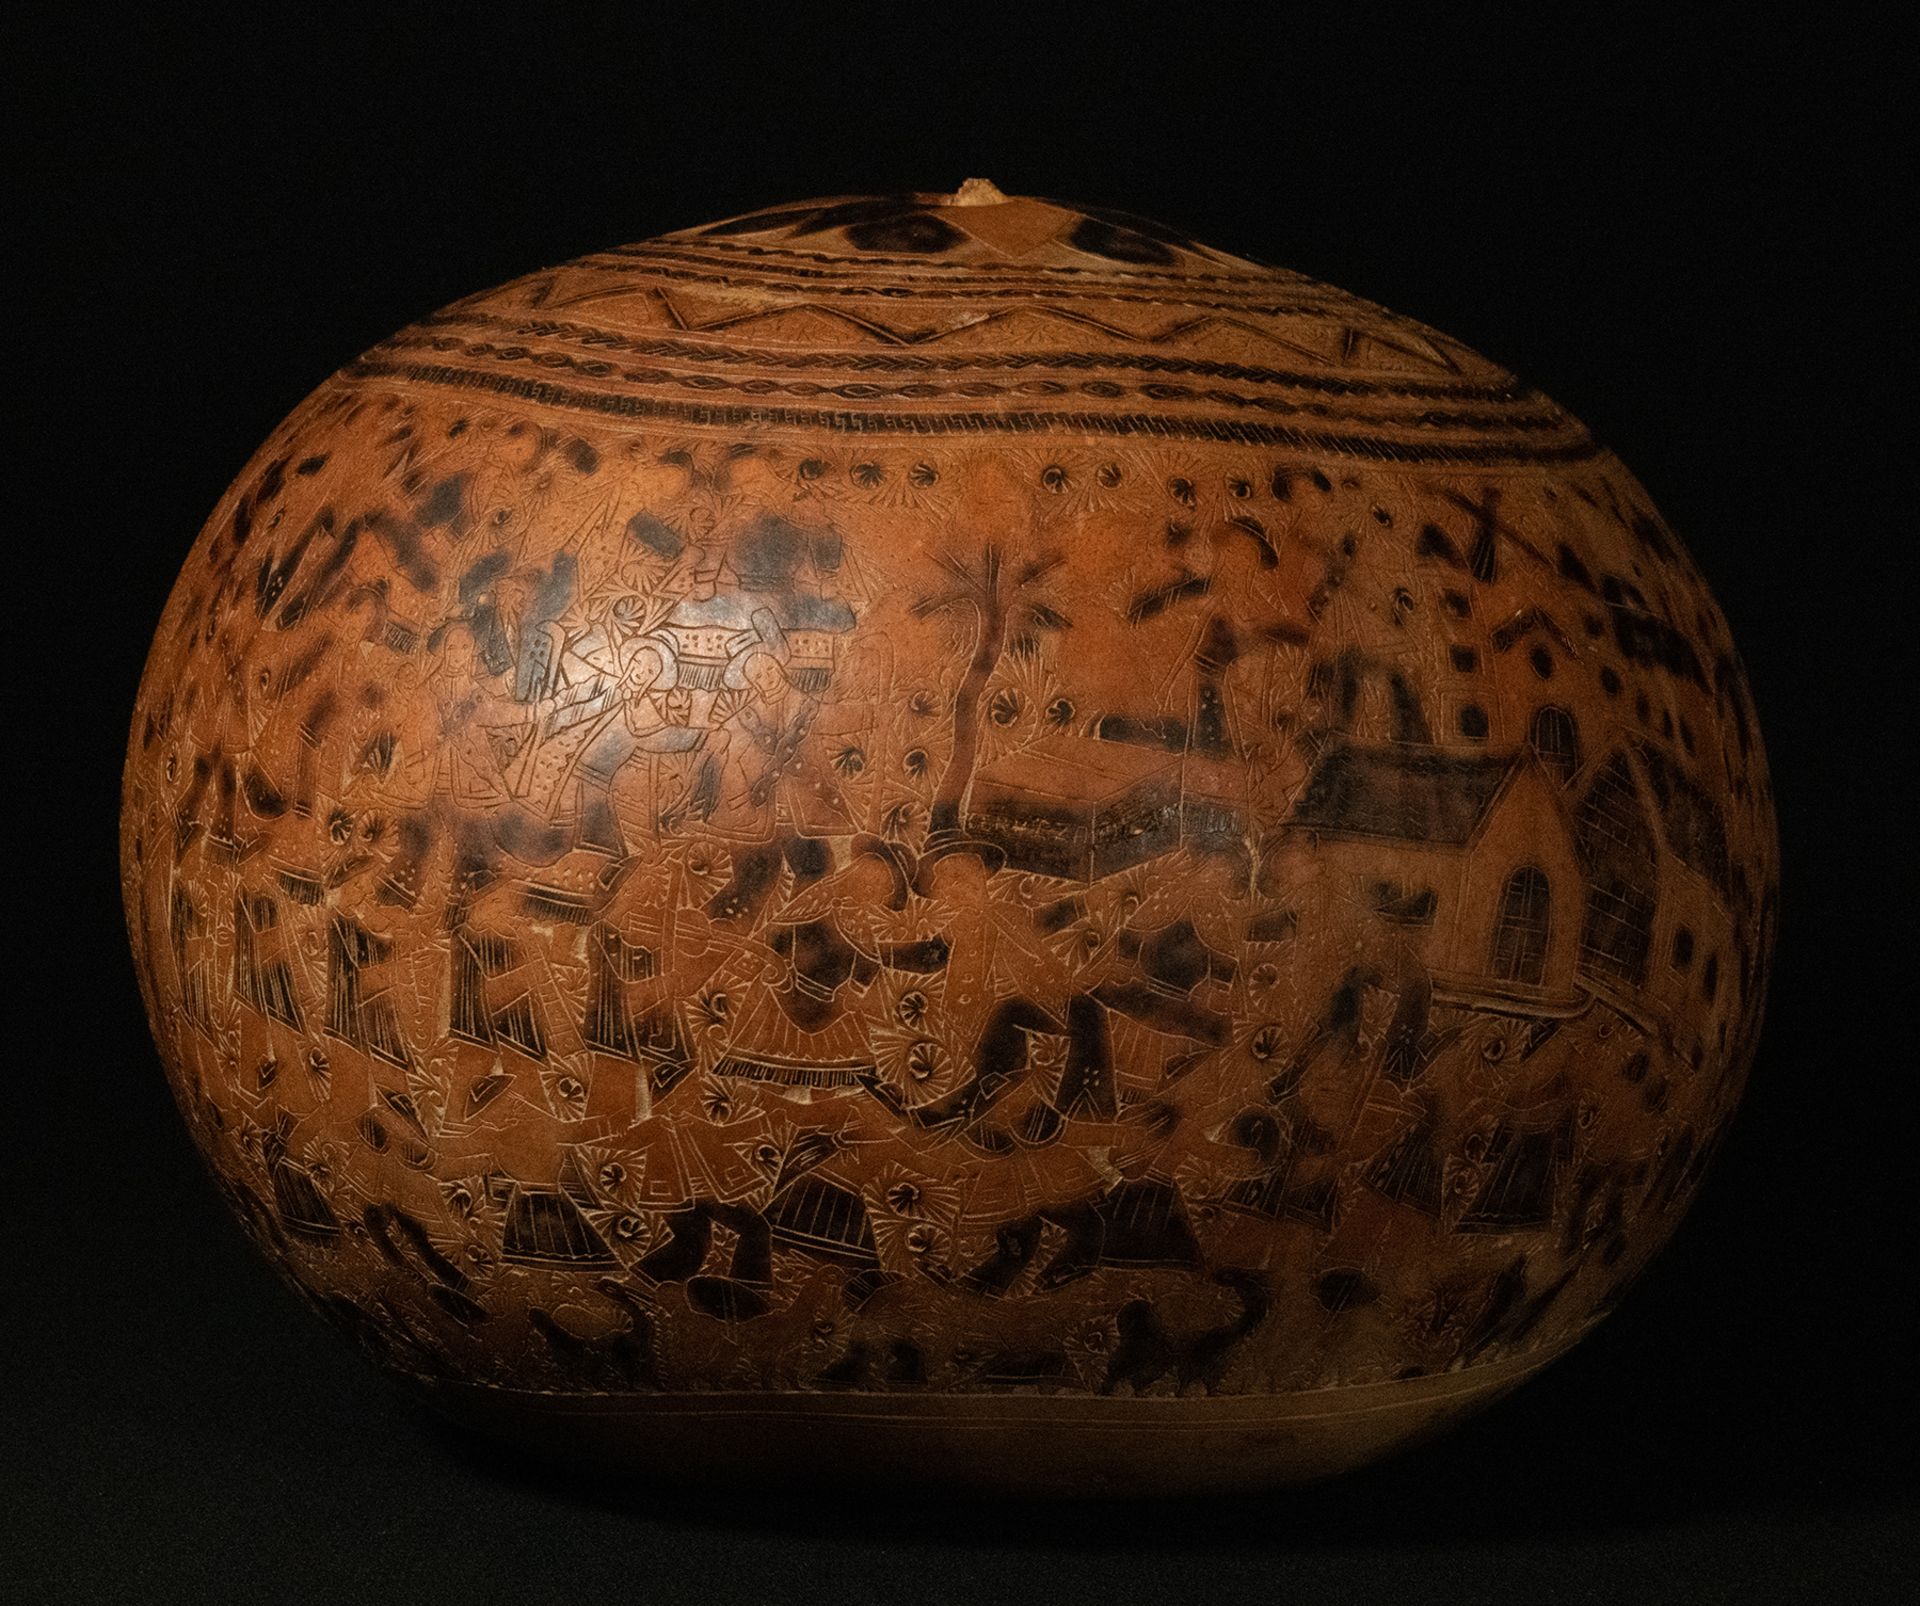 Peruvian carved gourd, 19th century - Image 3 of 4